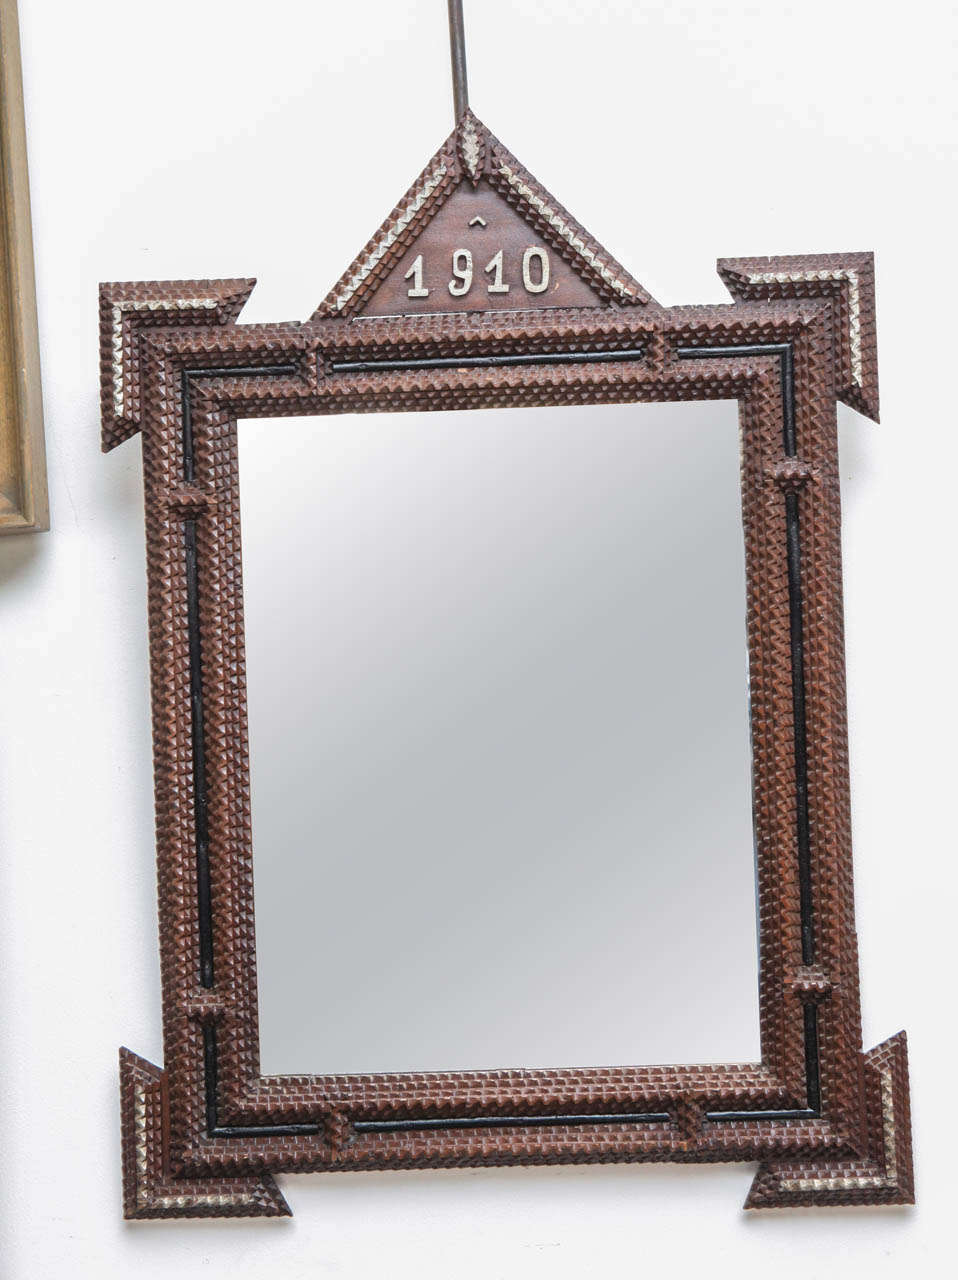 An American pair of Tramp Art Frames, with the comemeration of the year 1910 wich might have been to represent a special event or occasion. These frames are made in the tramp art manner, with layered hand cut geometric designs  having an unusual and